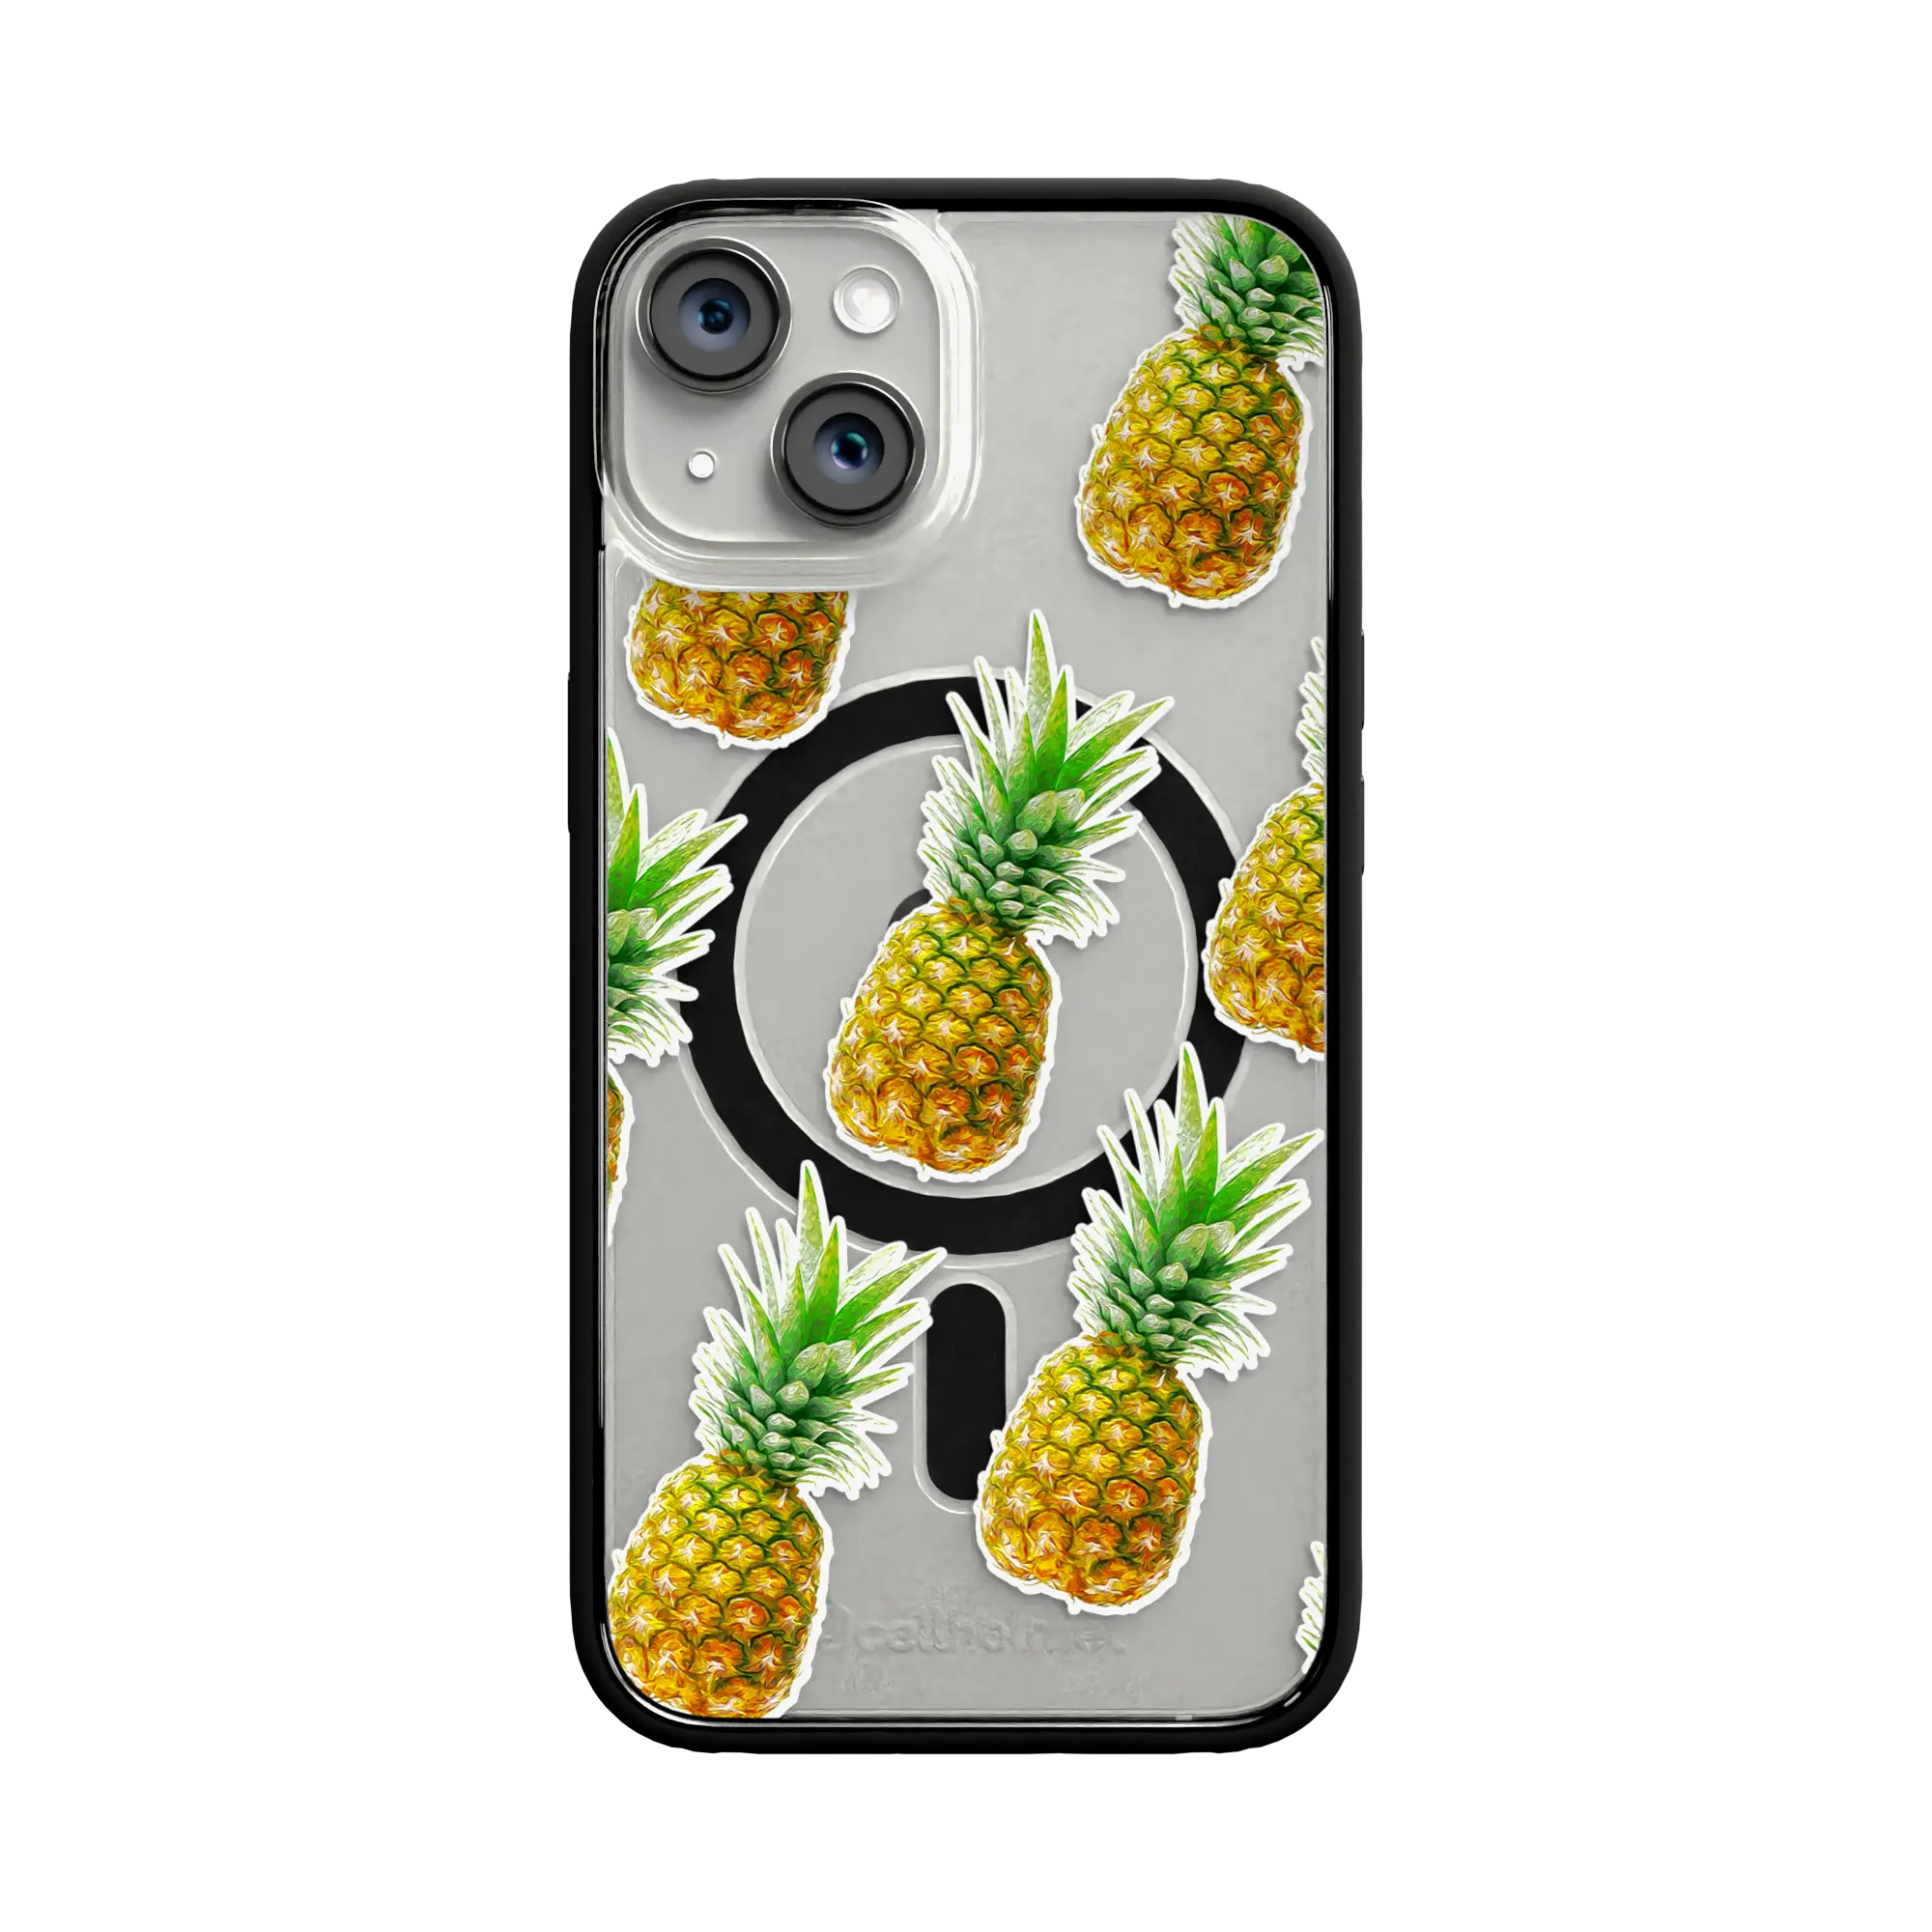 Apple-iPhone-12-12-Pro-Crystal-Clear Pineapple Splash | Protective MagSafe Case | Fruits Collection for Apple iPhone 12 Series cellhelmet cellhelmet